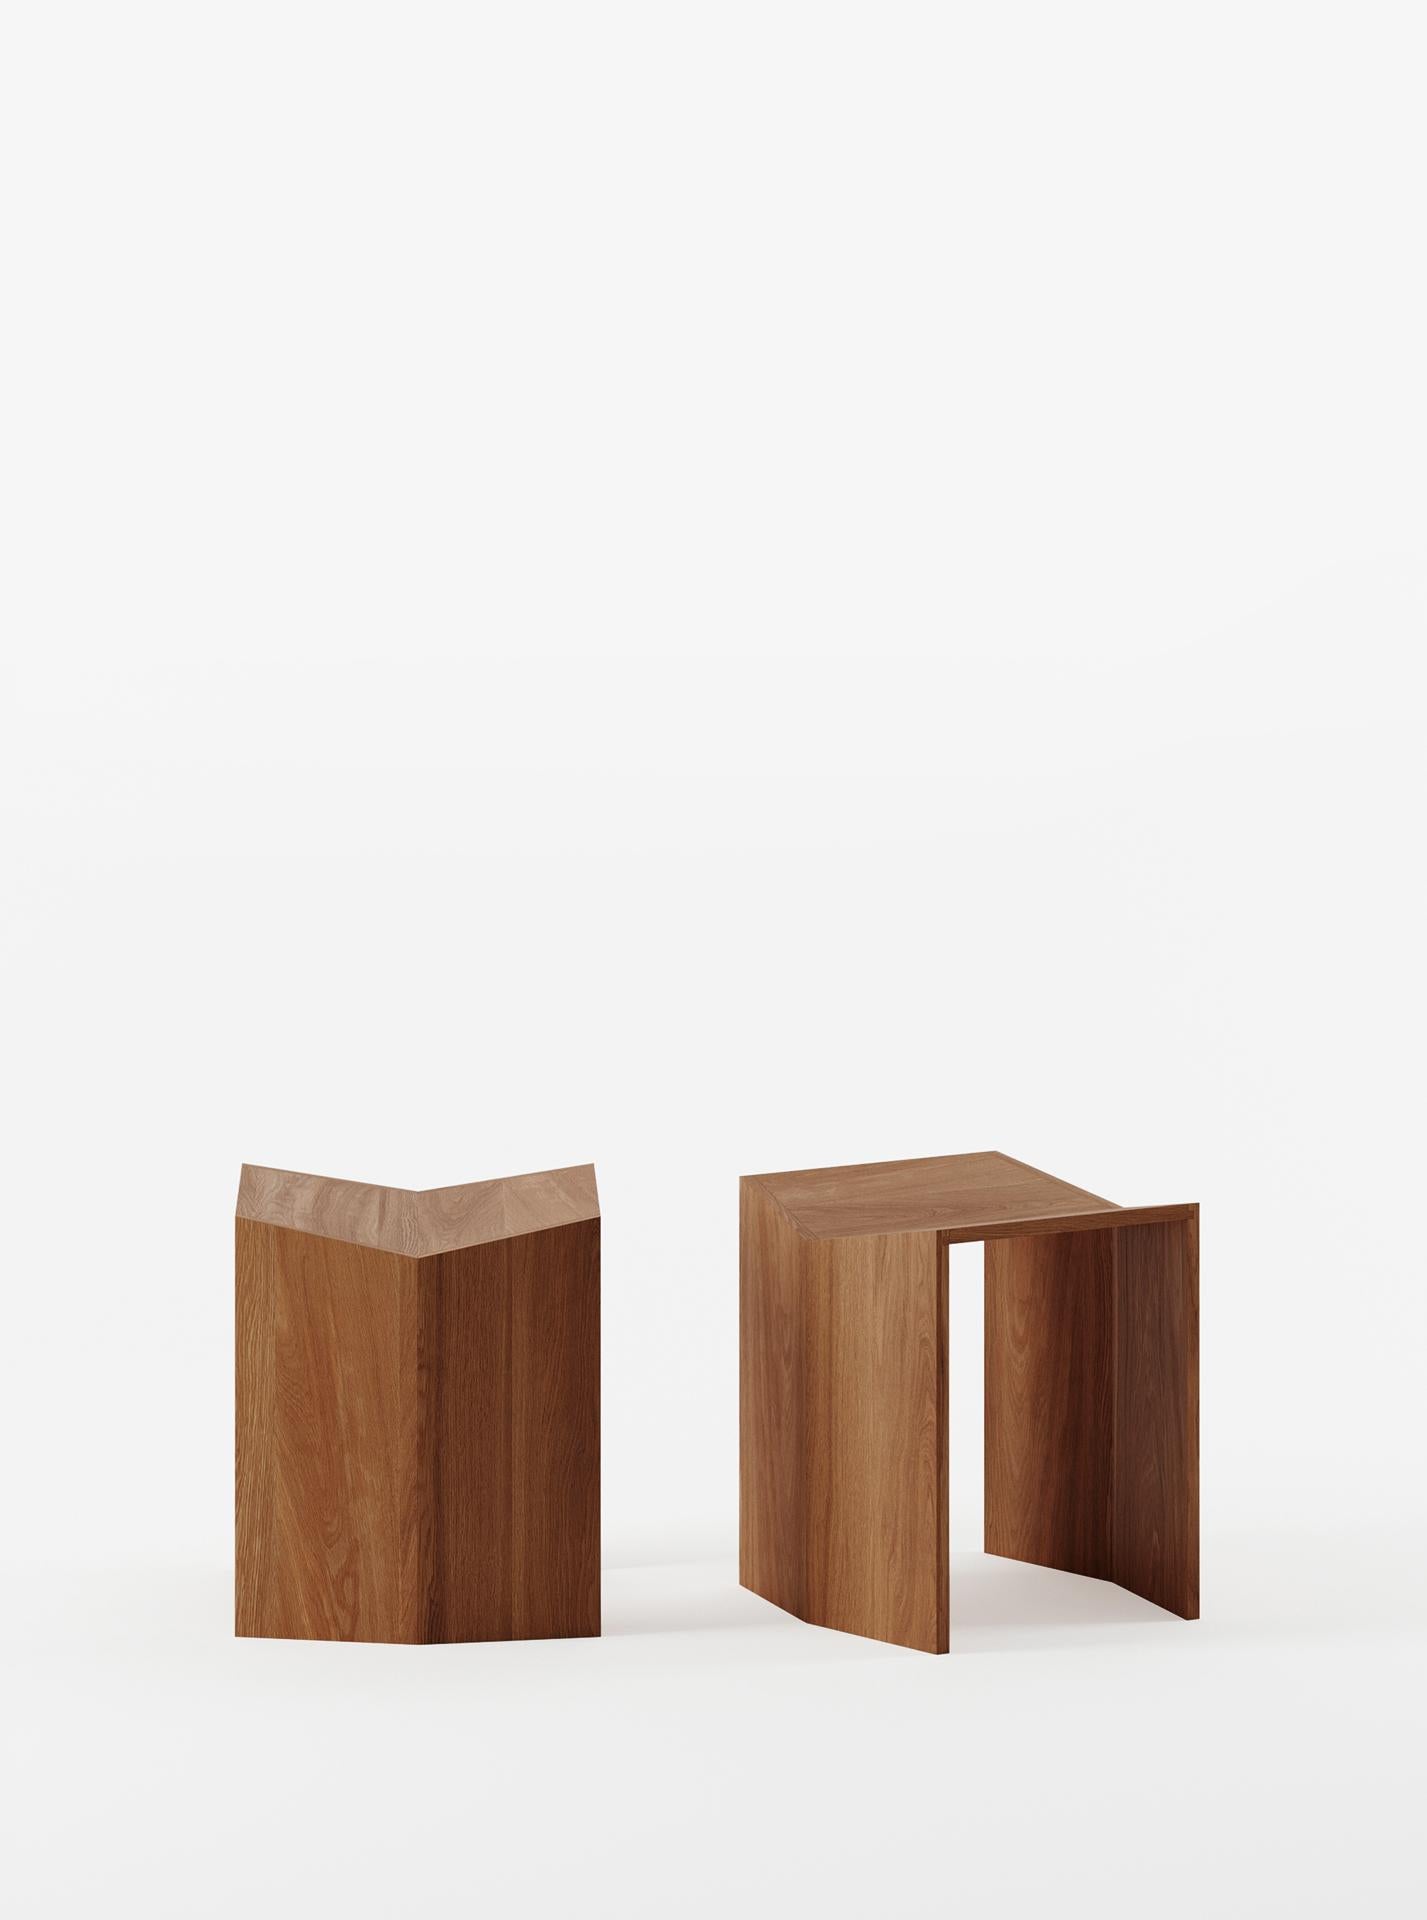 Inspired by classical Greek architecture, the Athens stool uses only two different elements. Made of solid wood, the geometry of the stool comes as a result of its assembly method - three simple 'folds' of the same angle. Put together using a groove